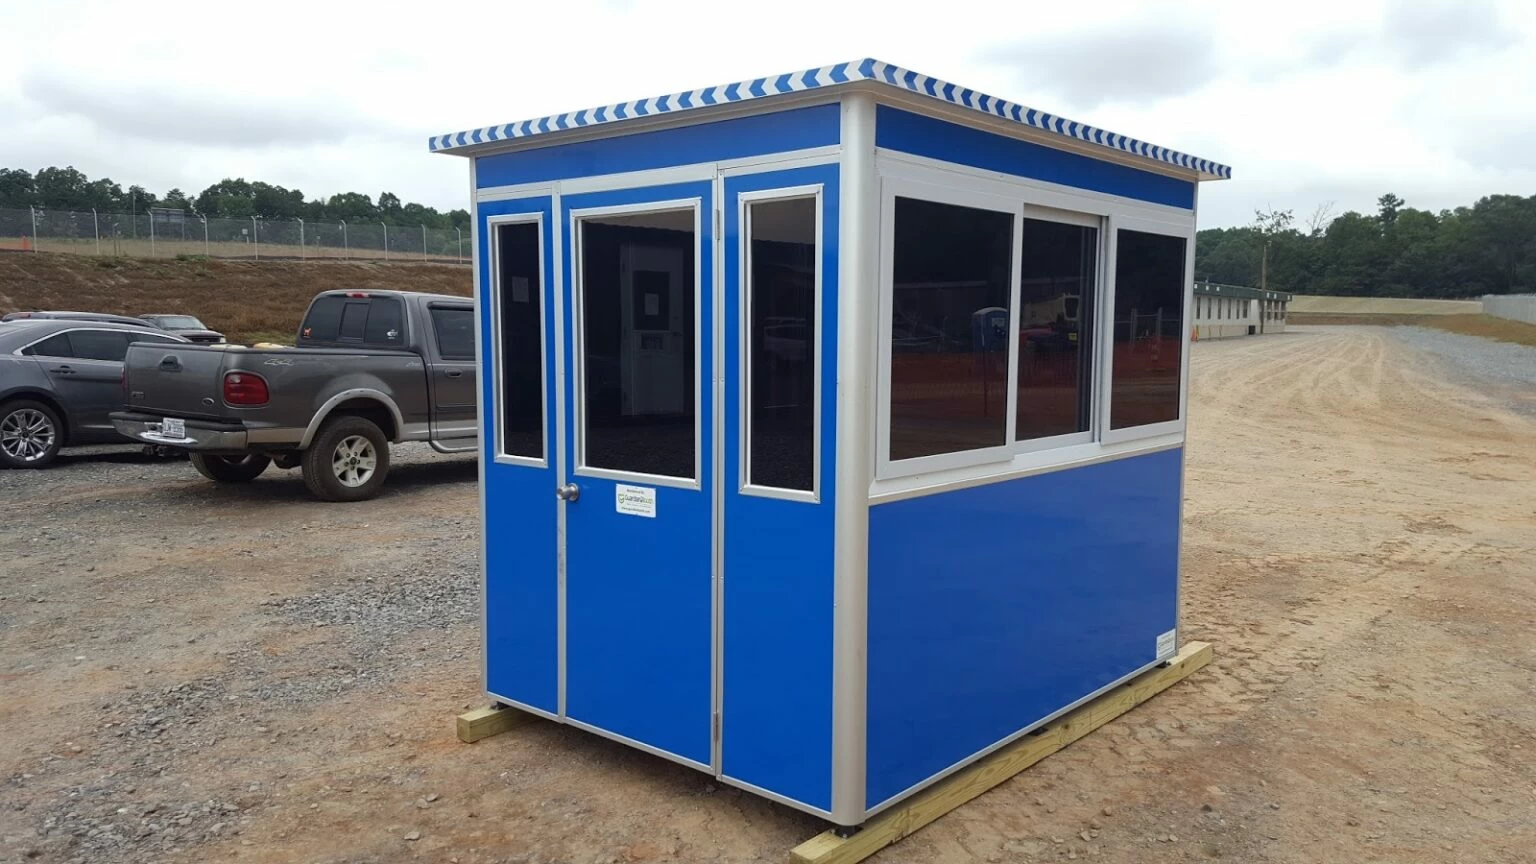 GuardianBooth portable blue guard booth placed at a construction site